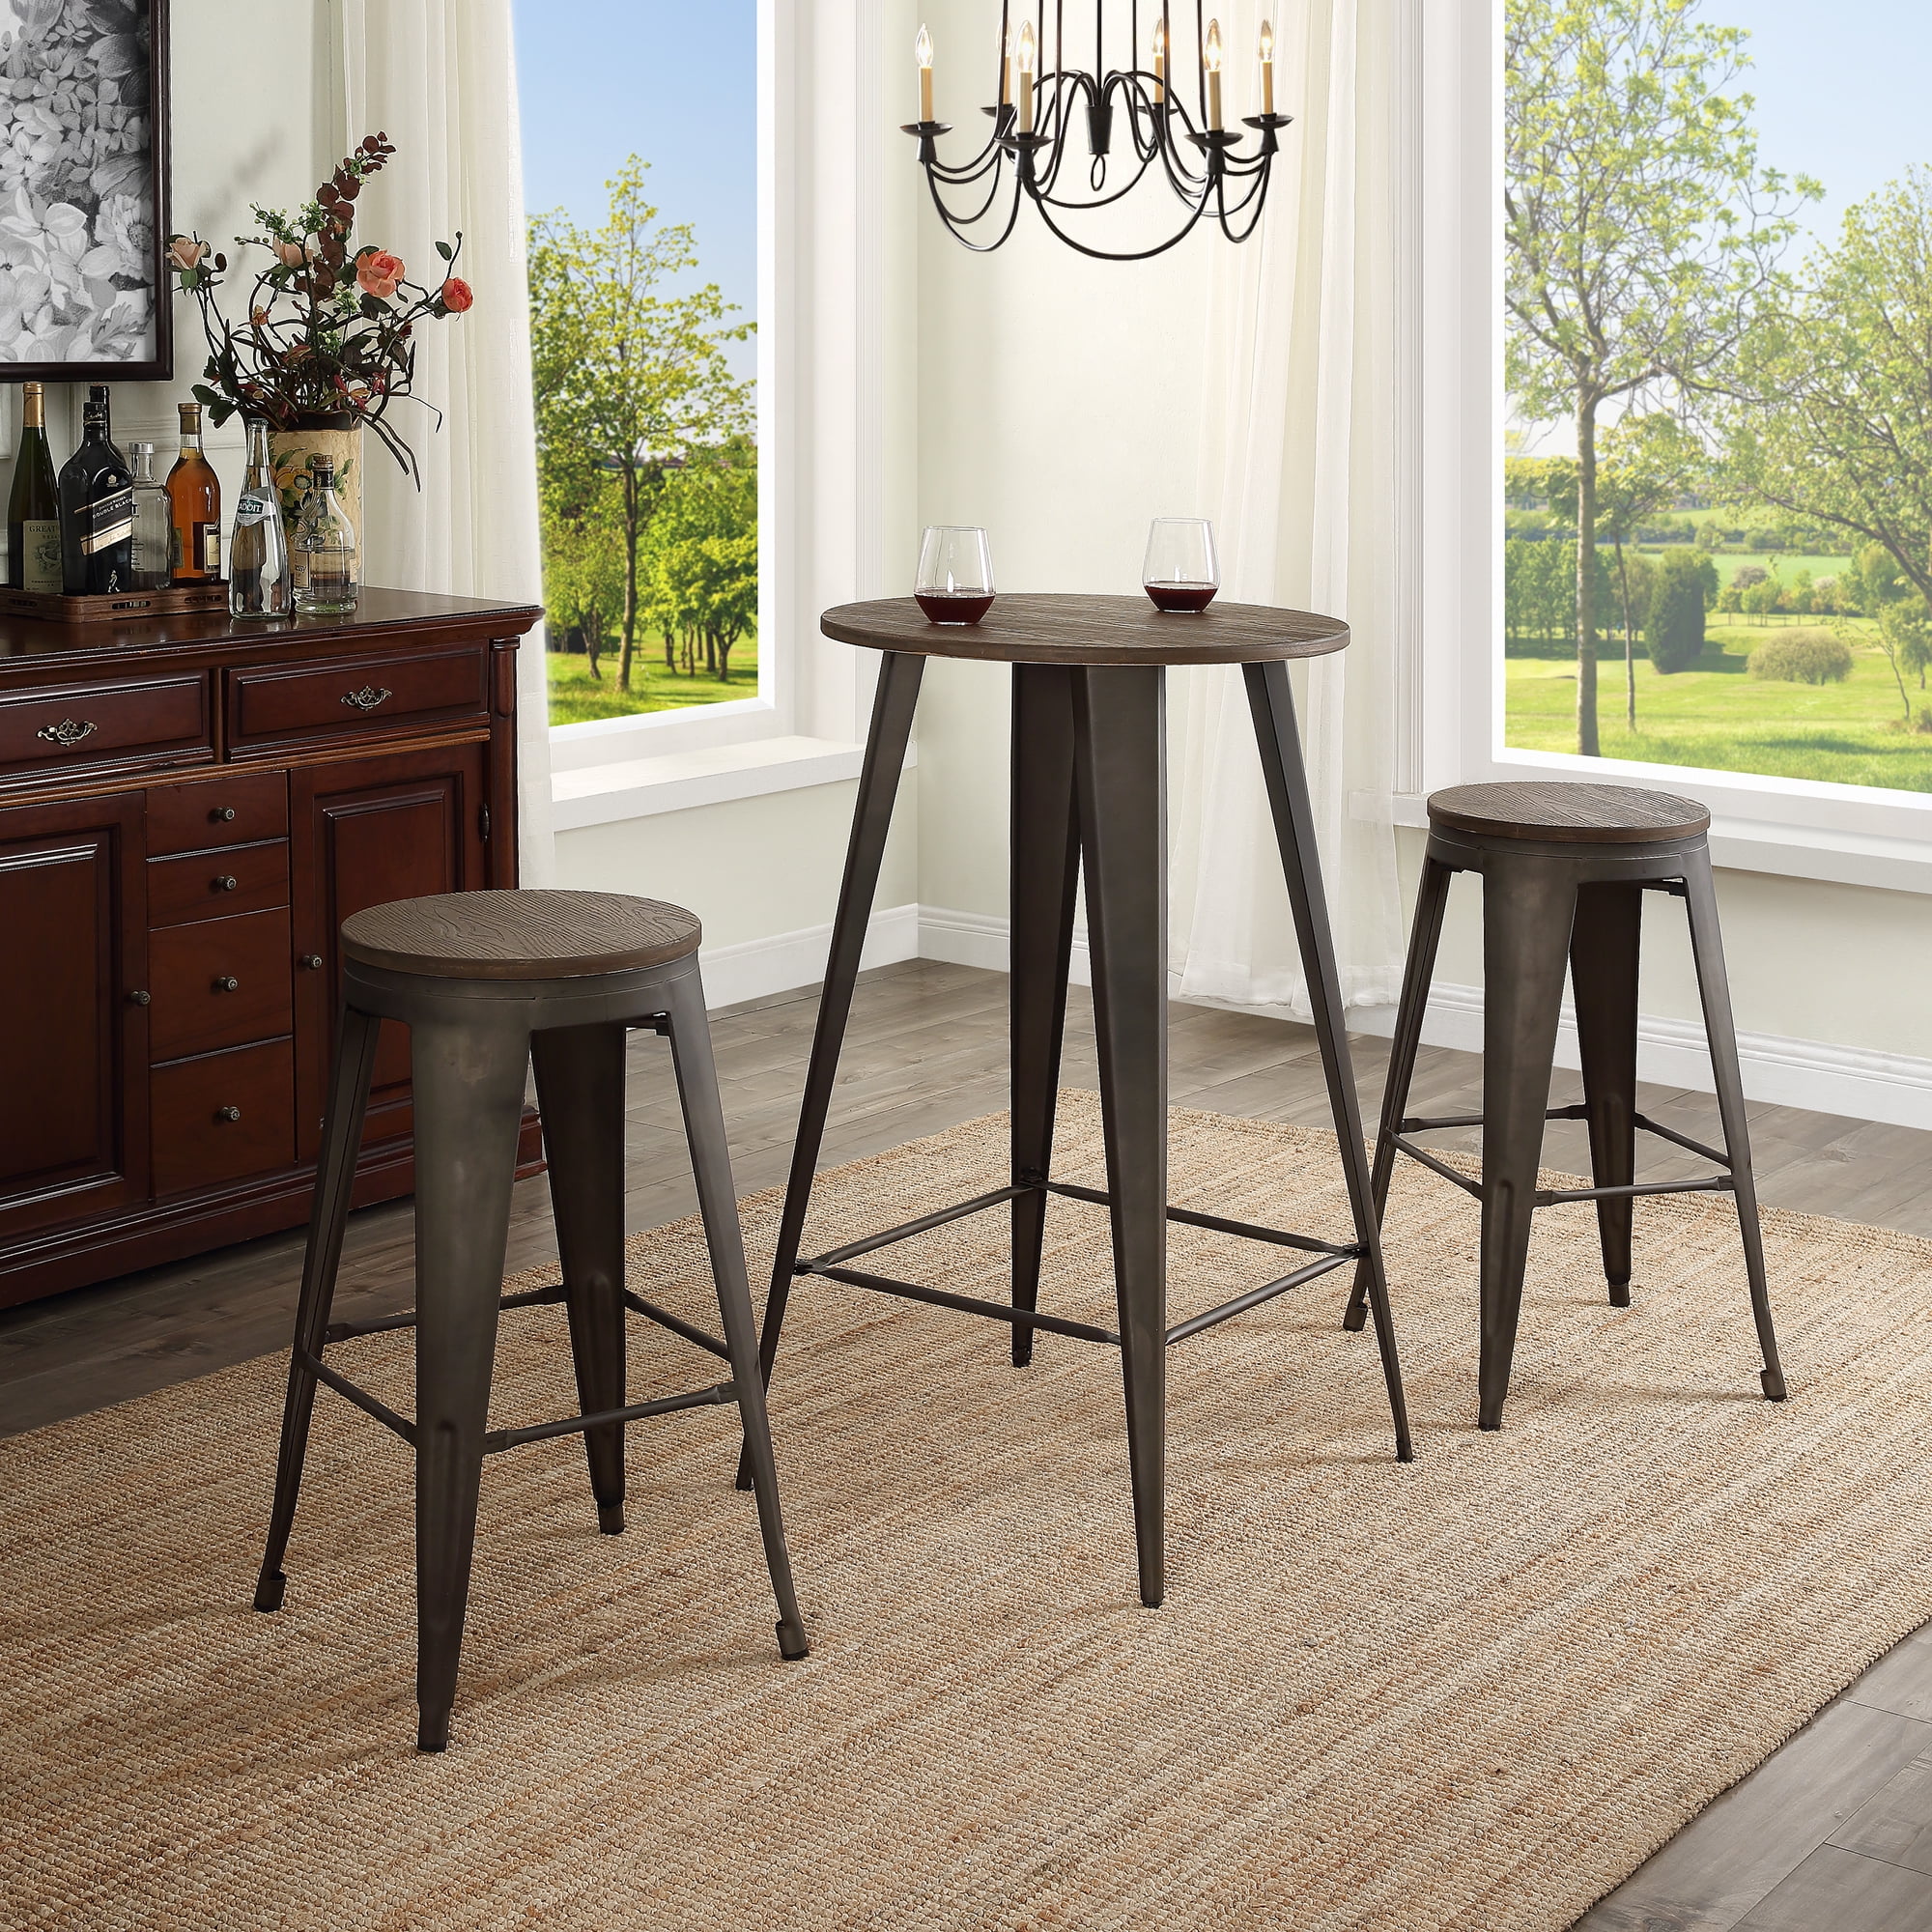 Dining Table Set With 2 Bar Stools, Small Round Bar Table And Stools